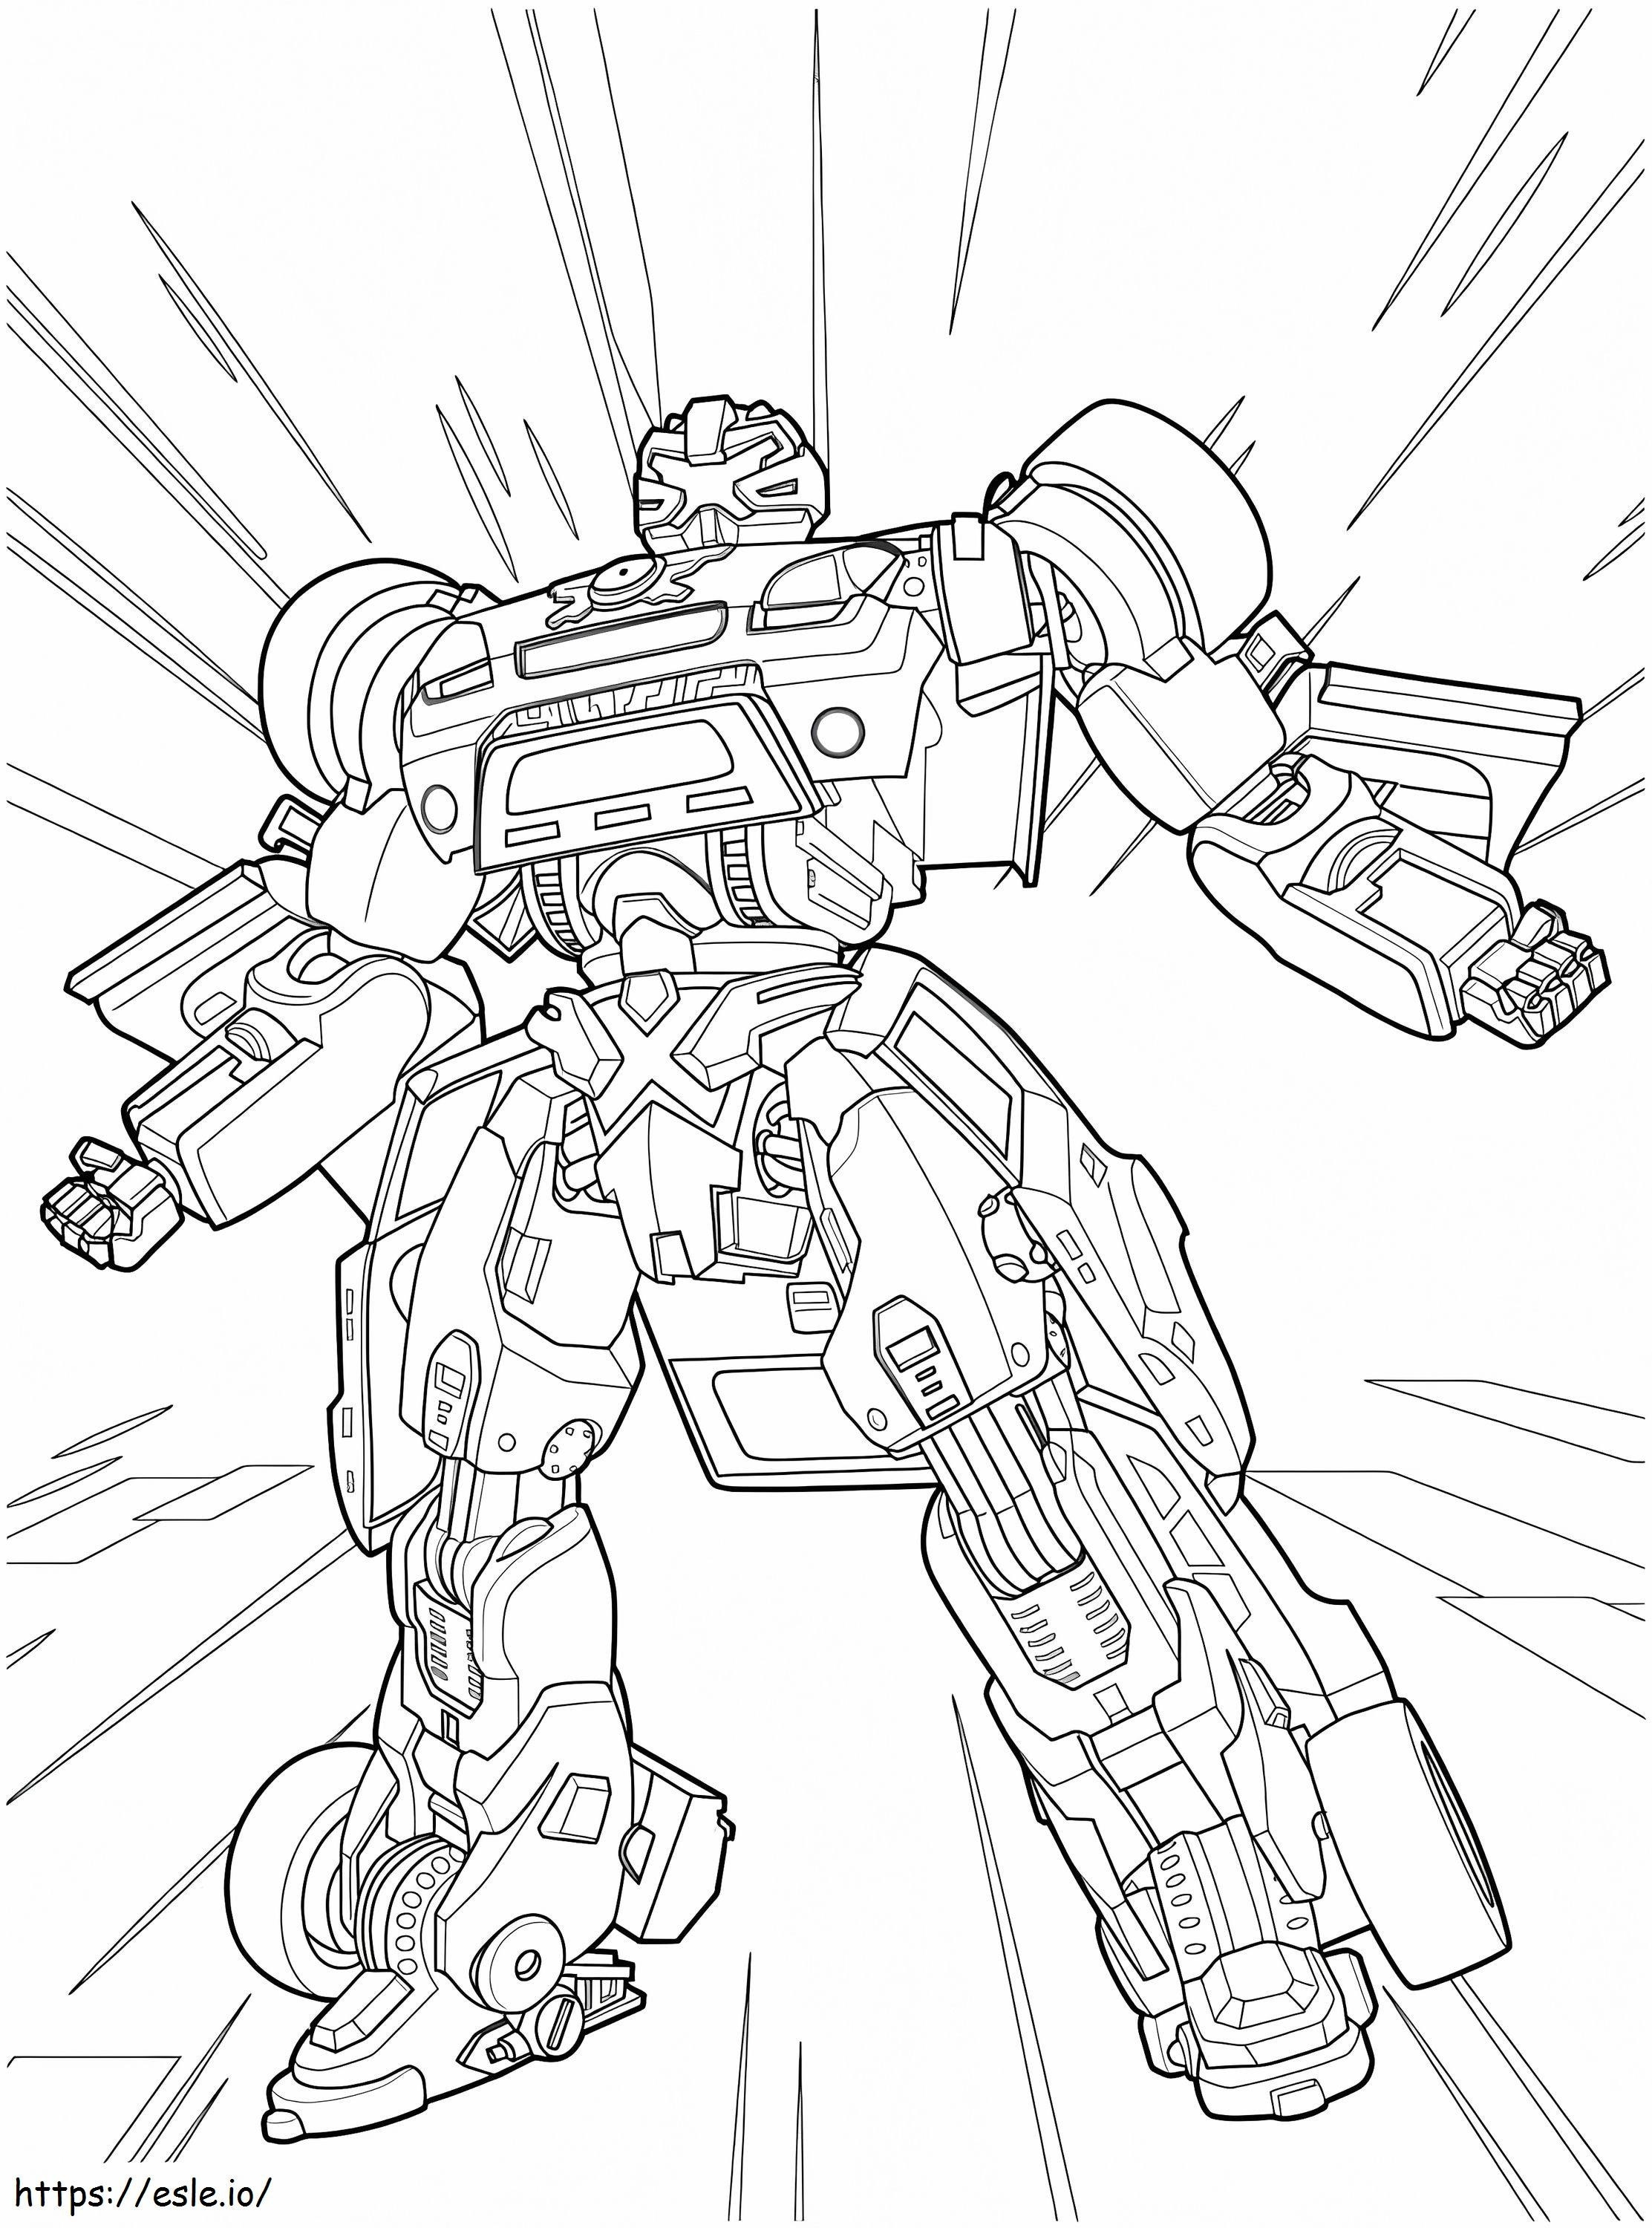 Free Tobot coloring page